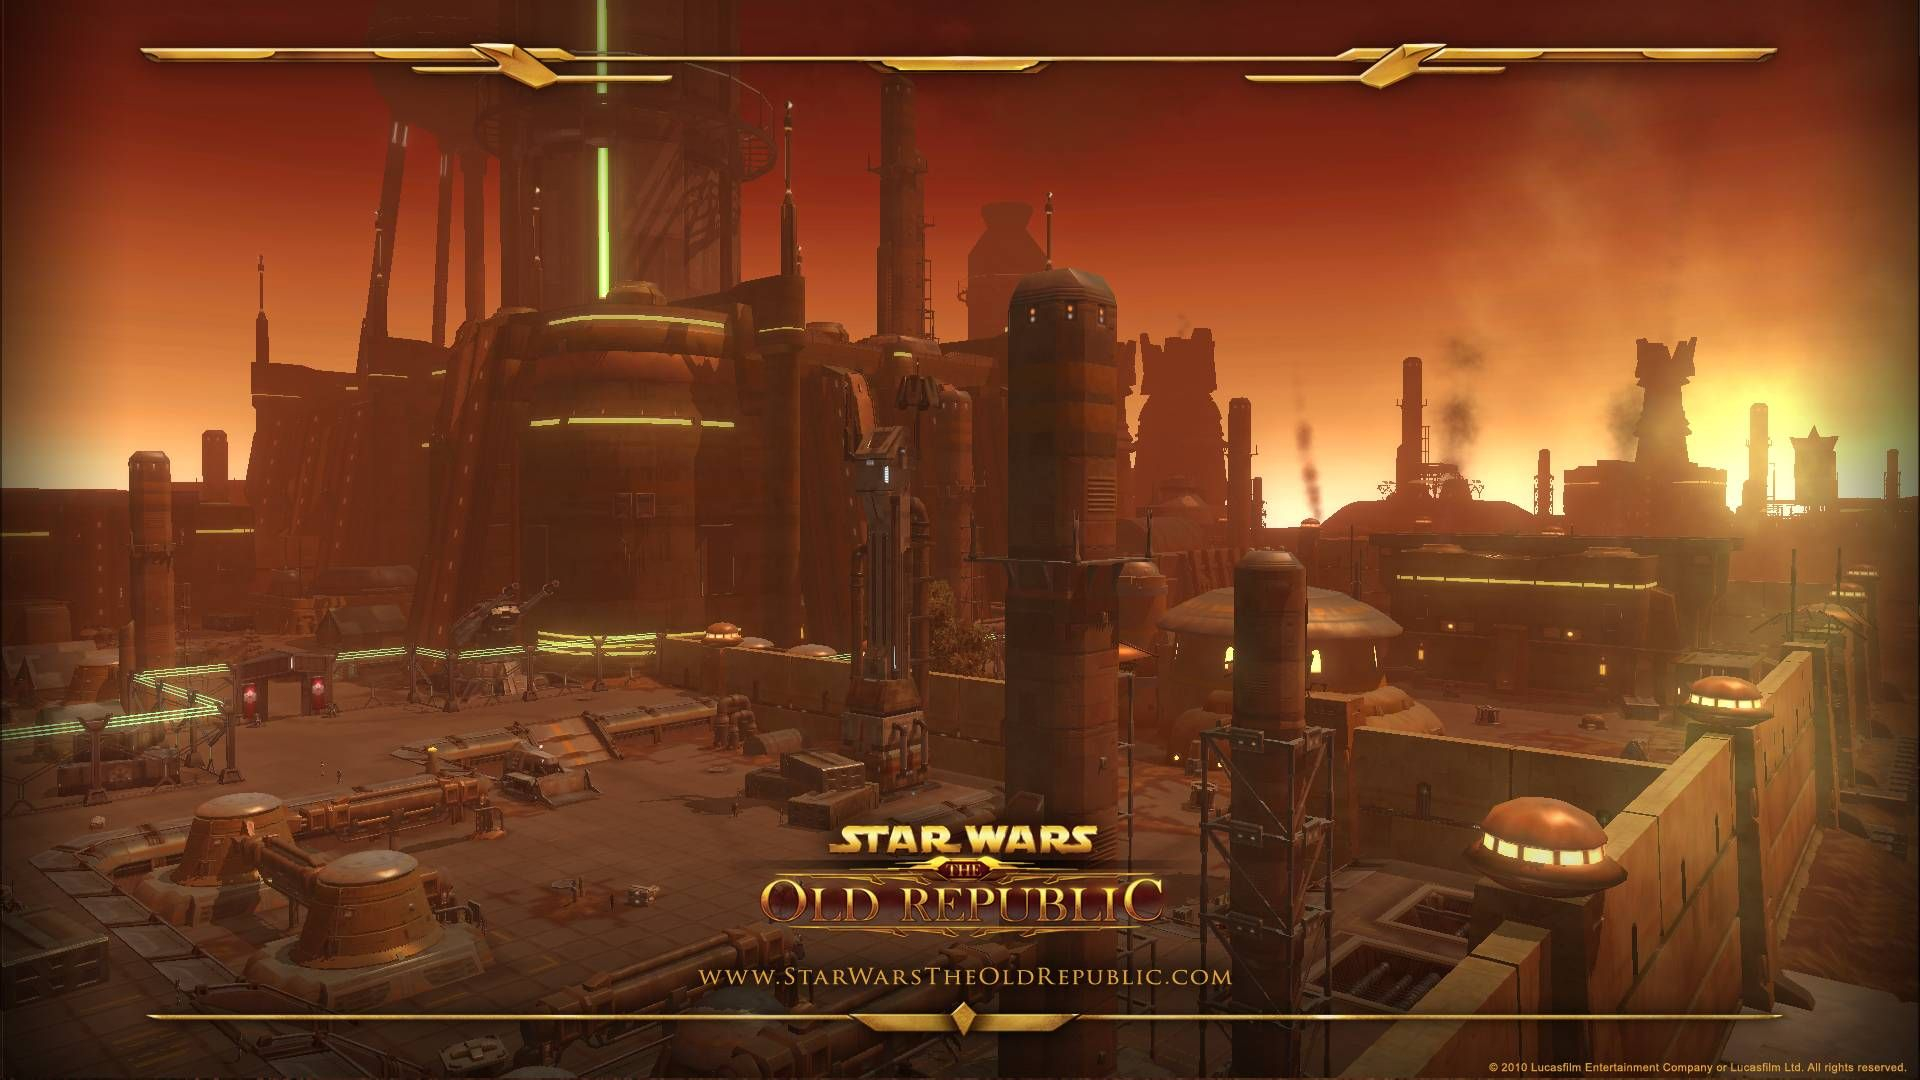 1920x1080 quesh, header, gallery, swtor wallpaper | Star wars the old, The old republic, Star wars games